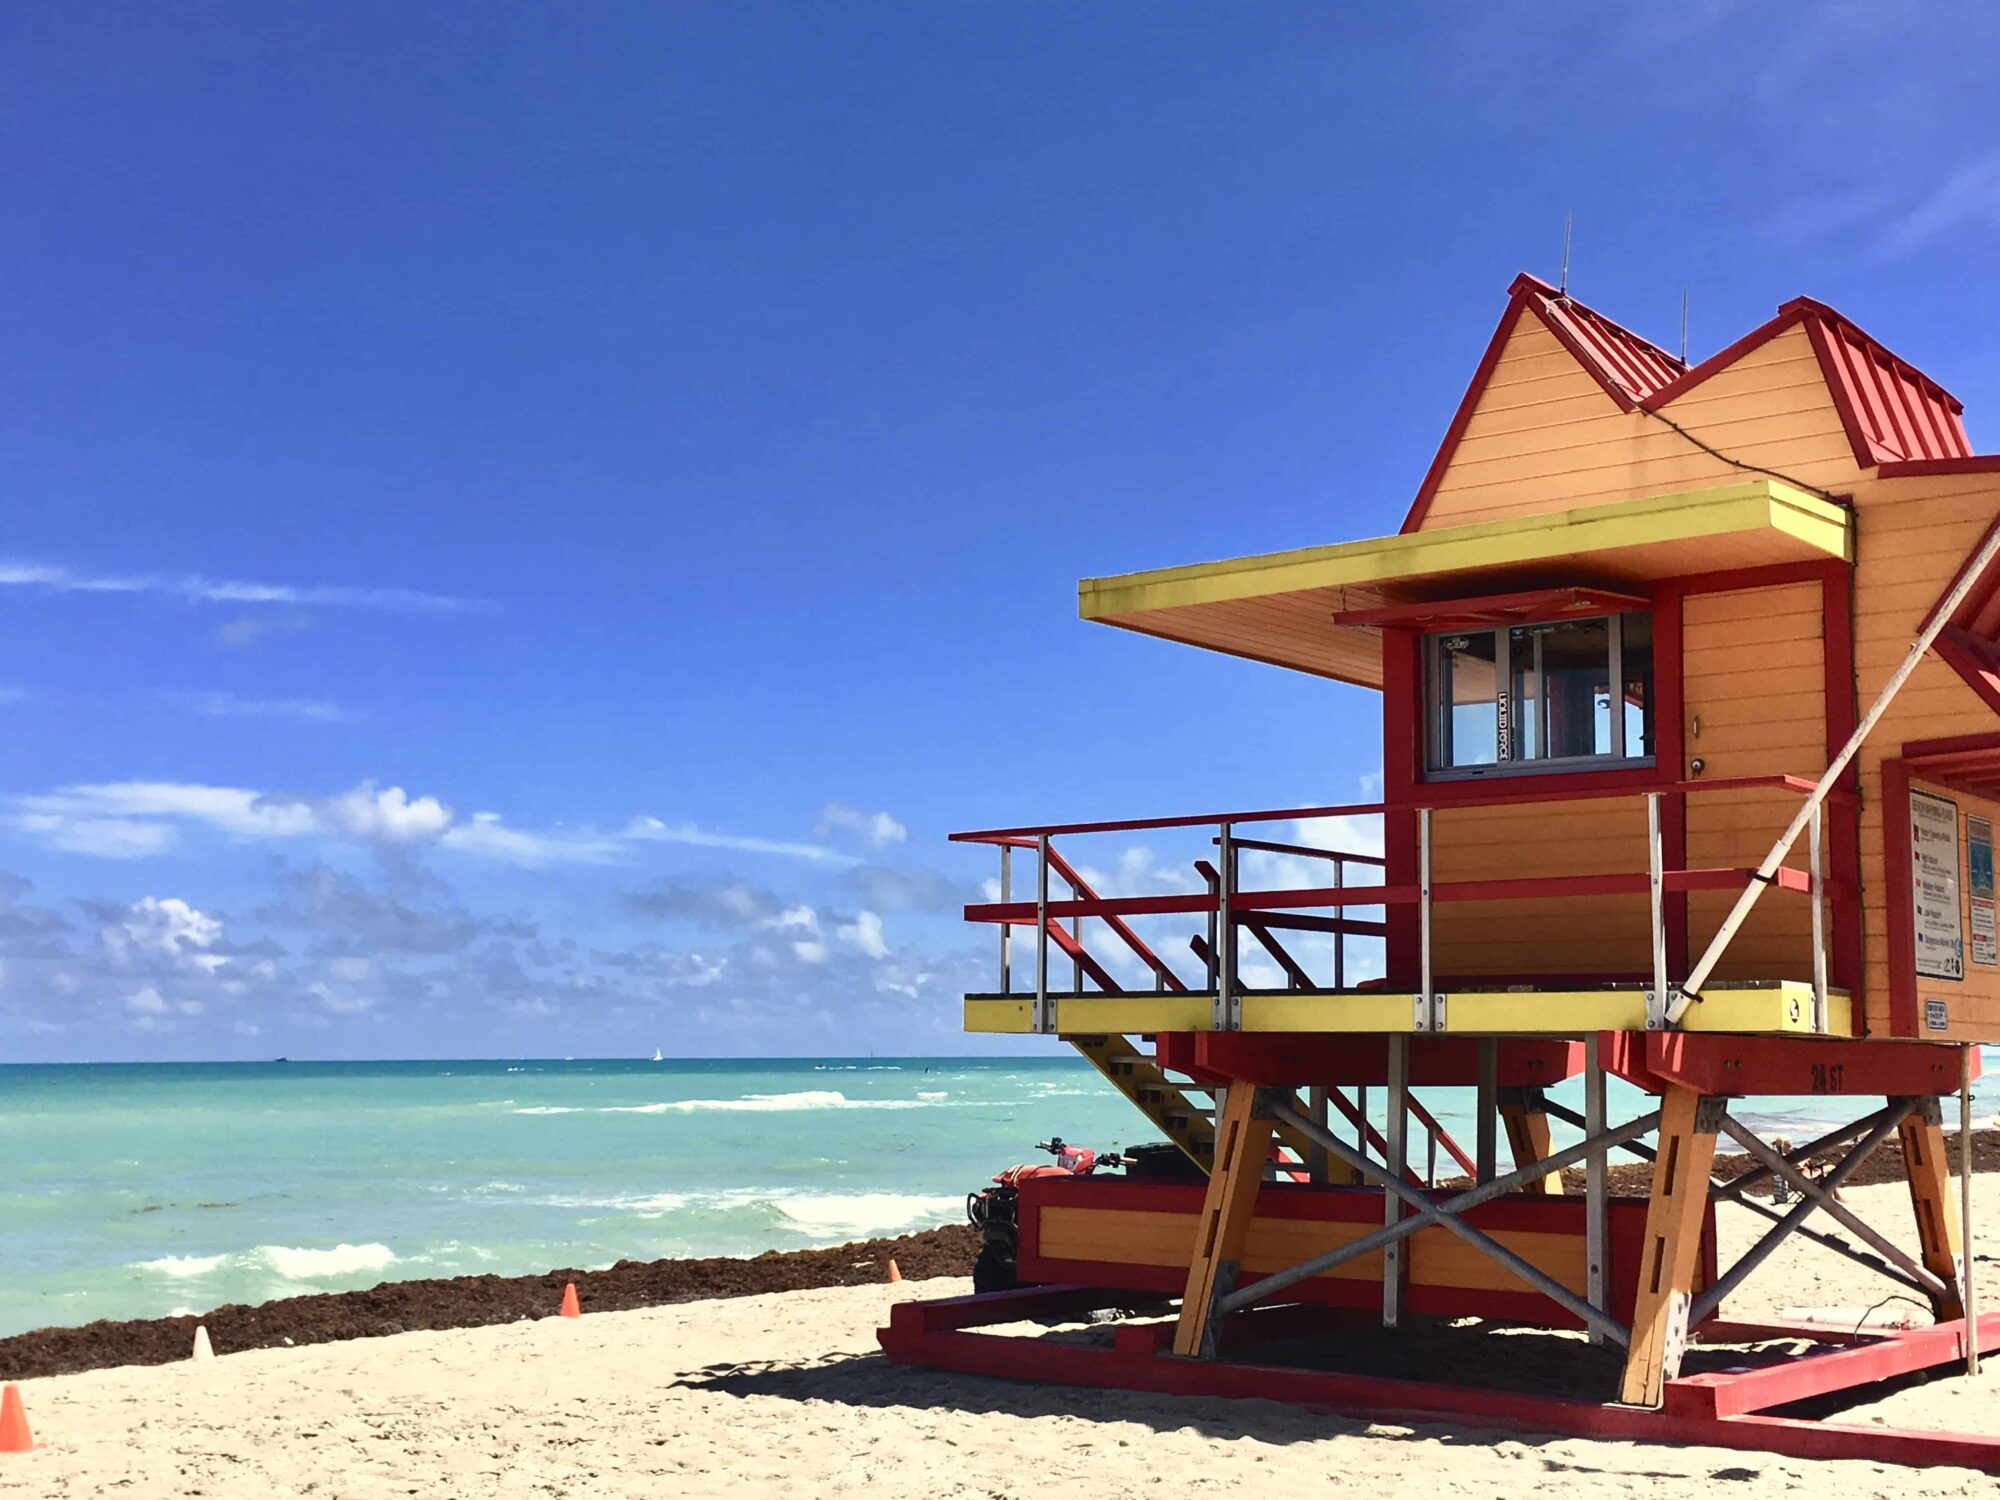 Iconic Lifeguard Stands South Beach